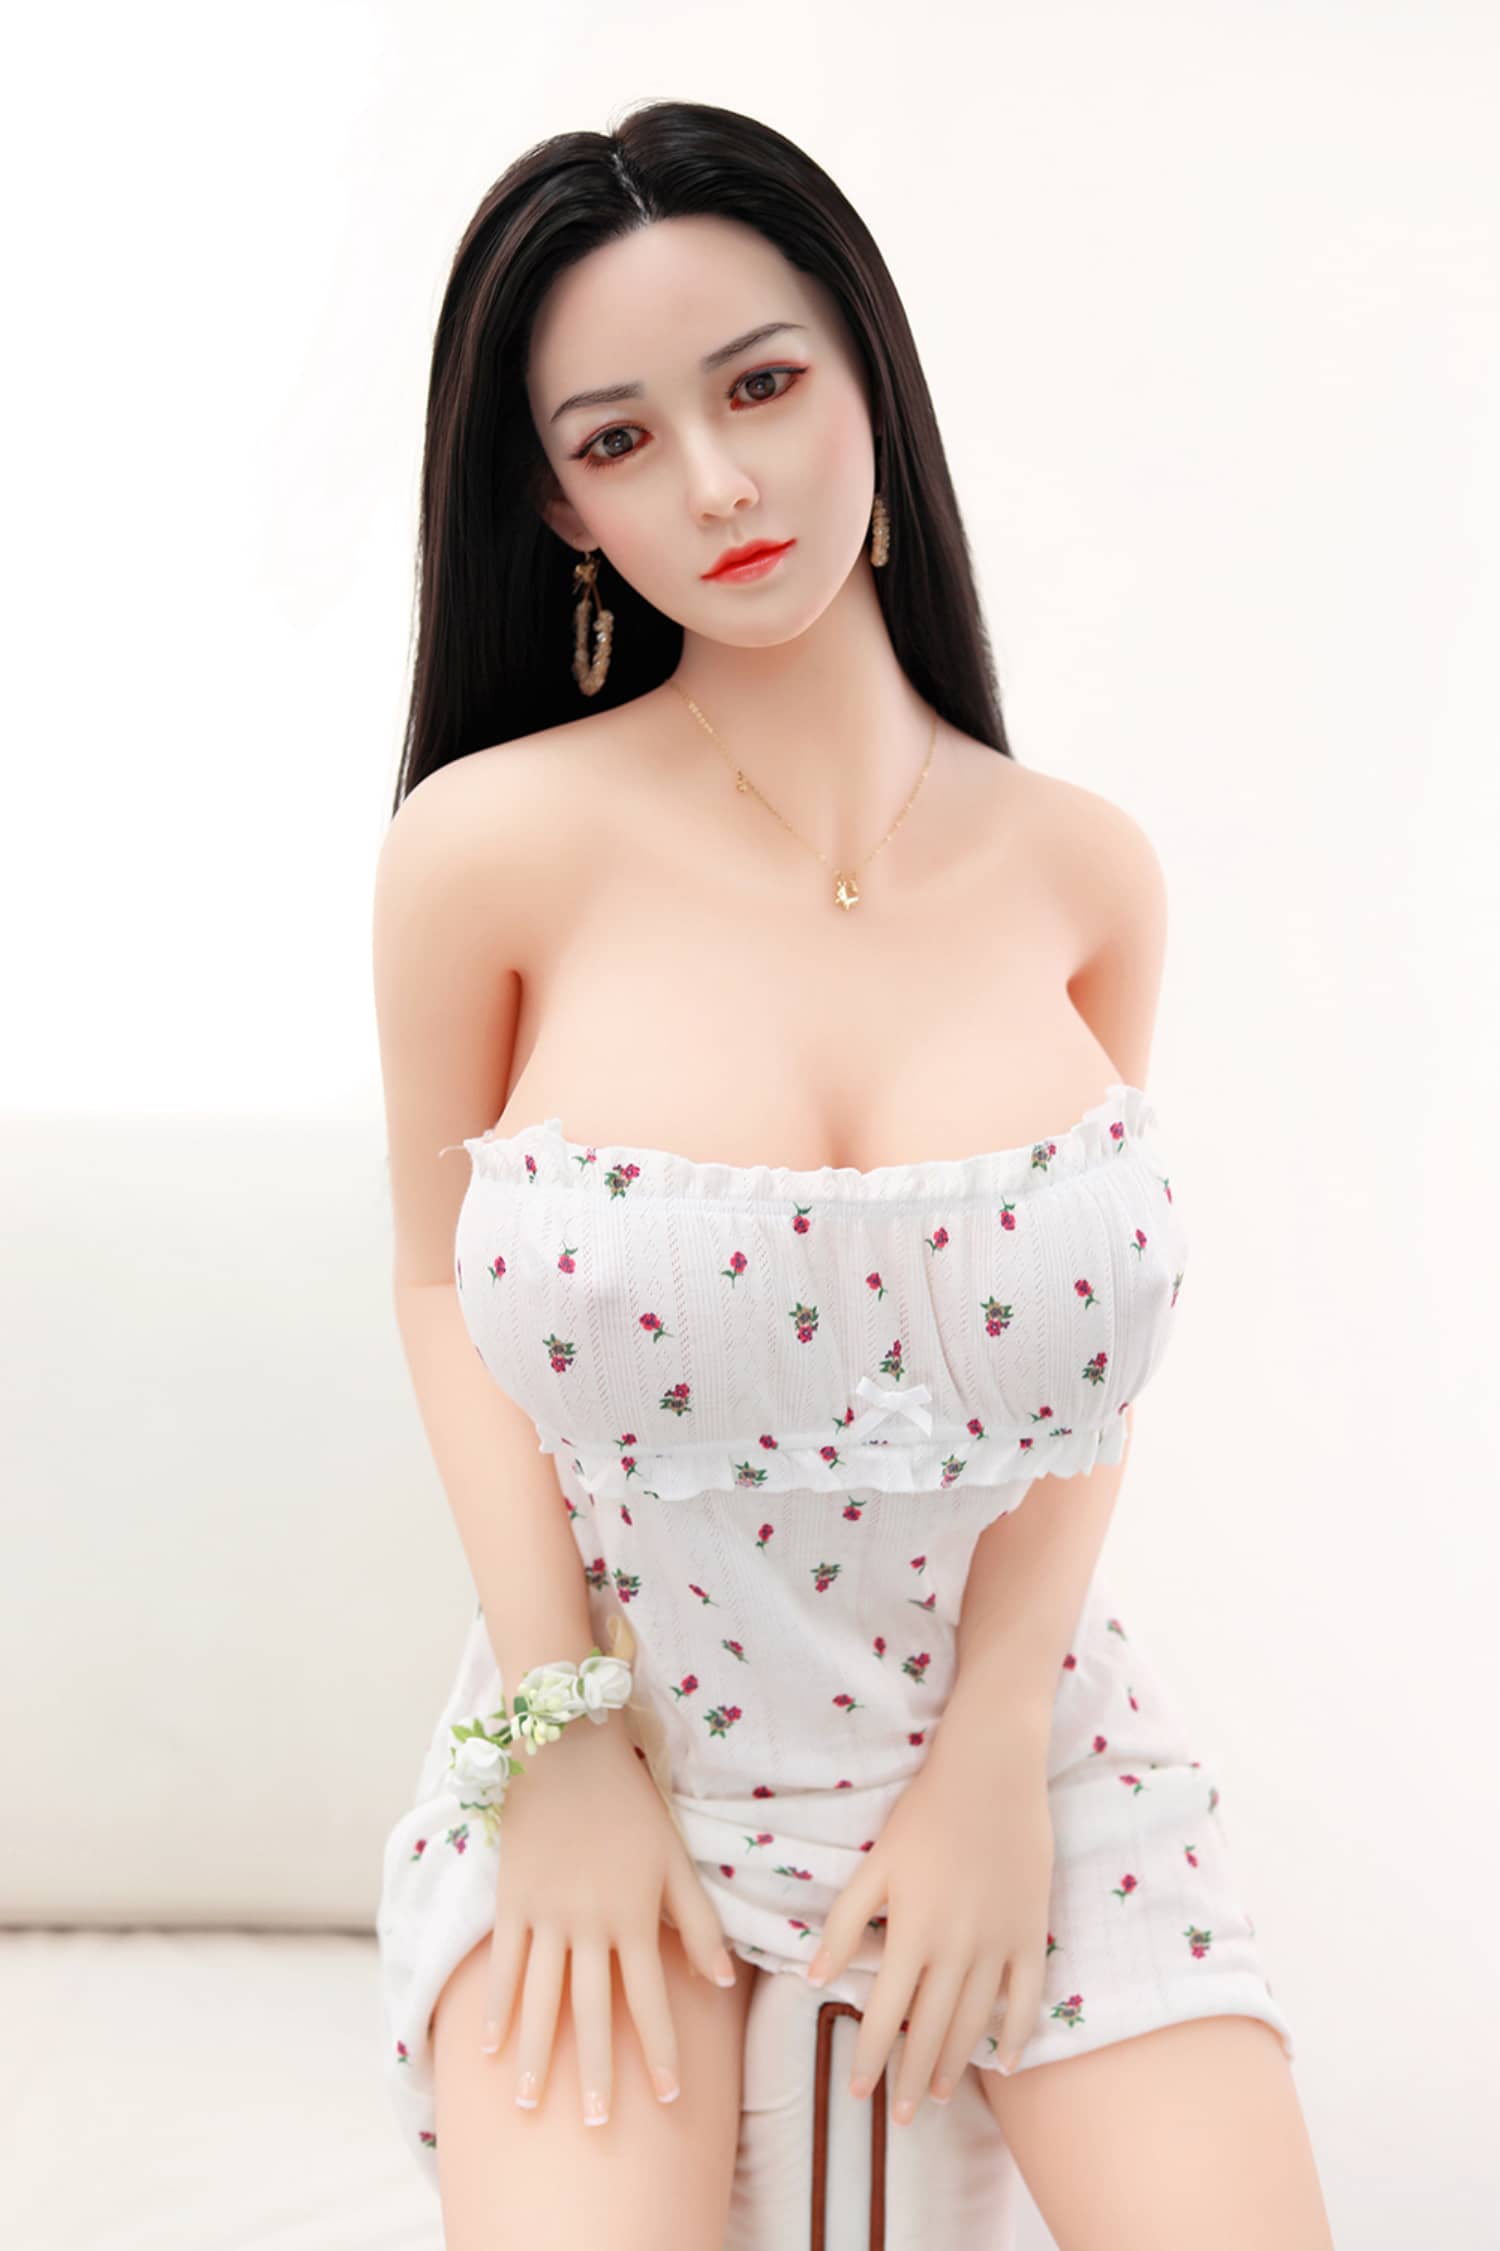 USA In Stock SYDOLL 158cm #221 D-CUP